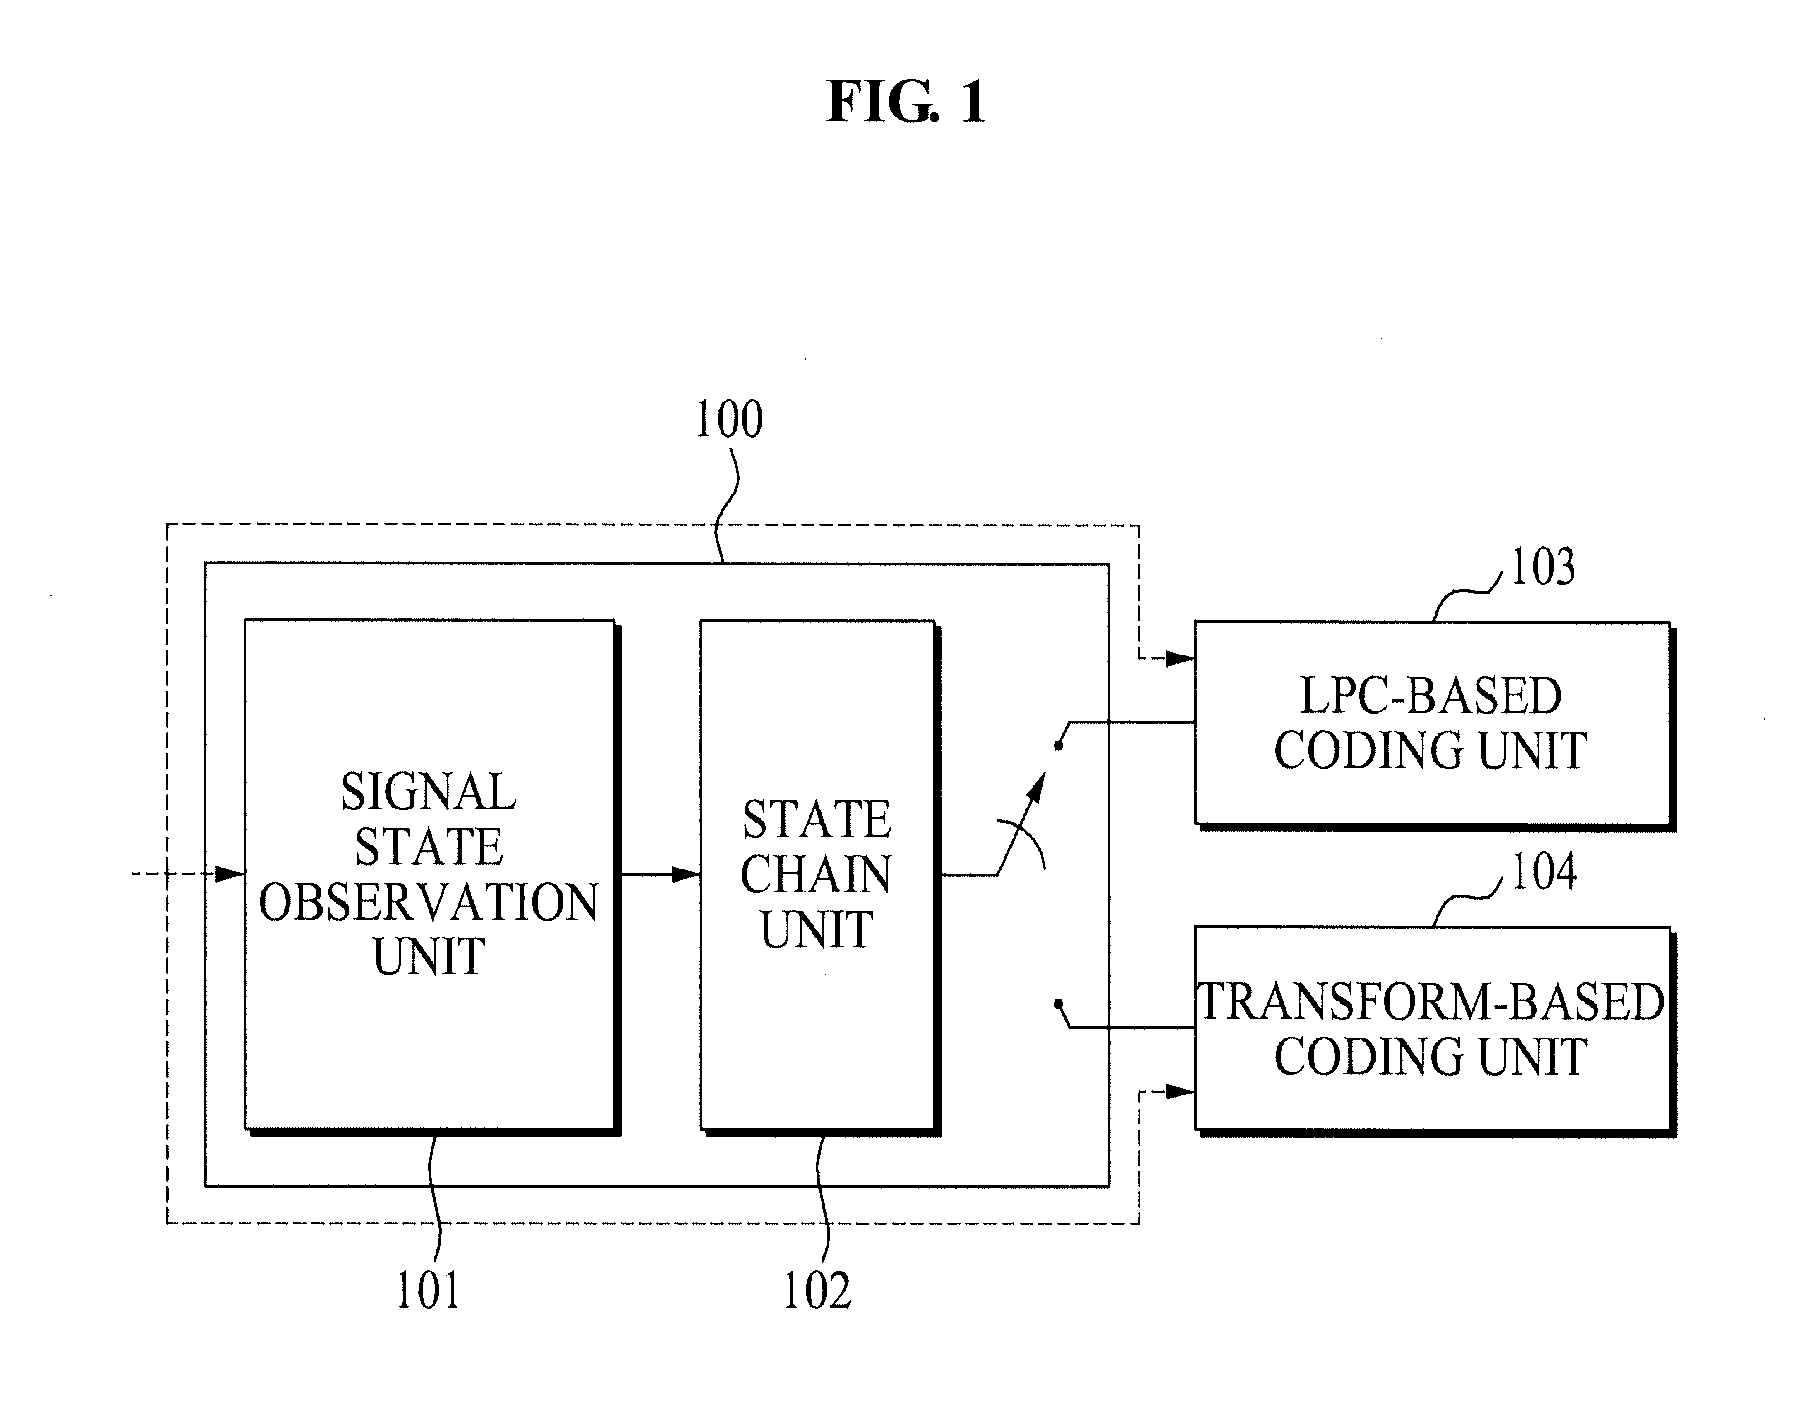 Apparatus for signal state decision of audio signal